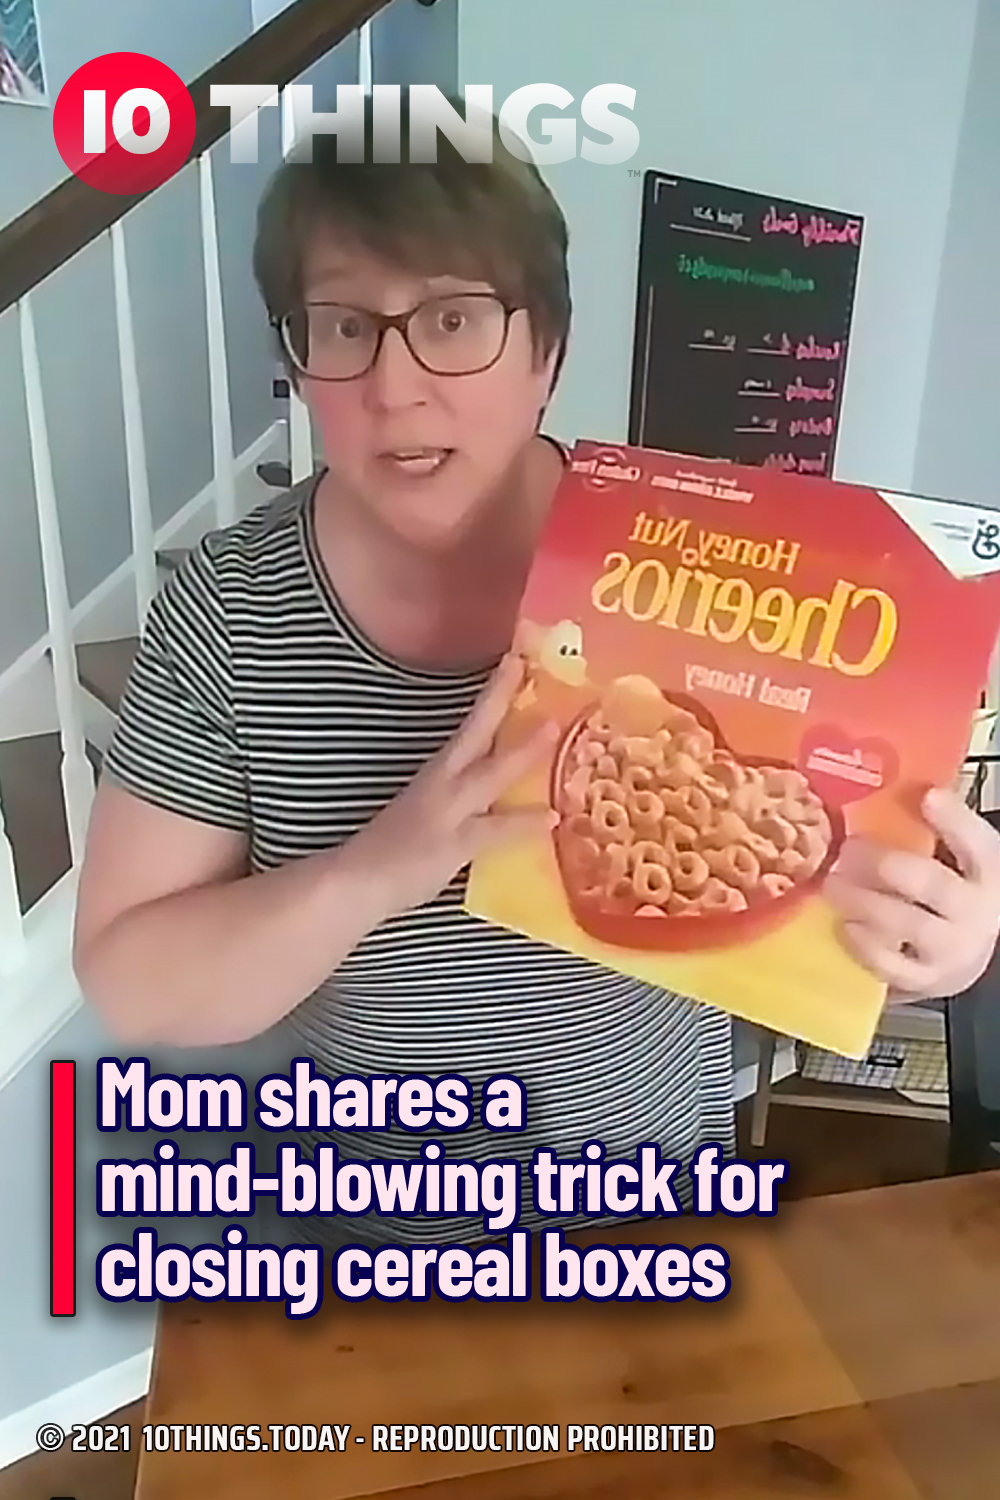 Mom shares a mind-blowing trick for closing cereal boxes